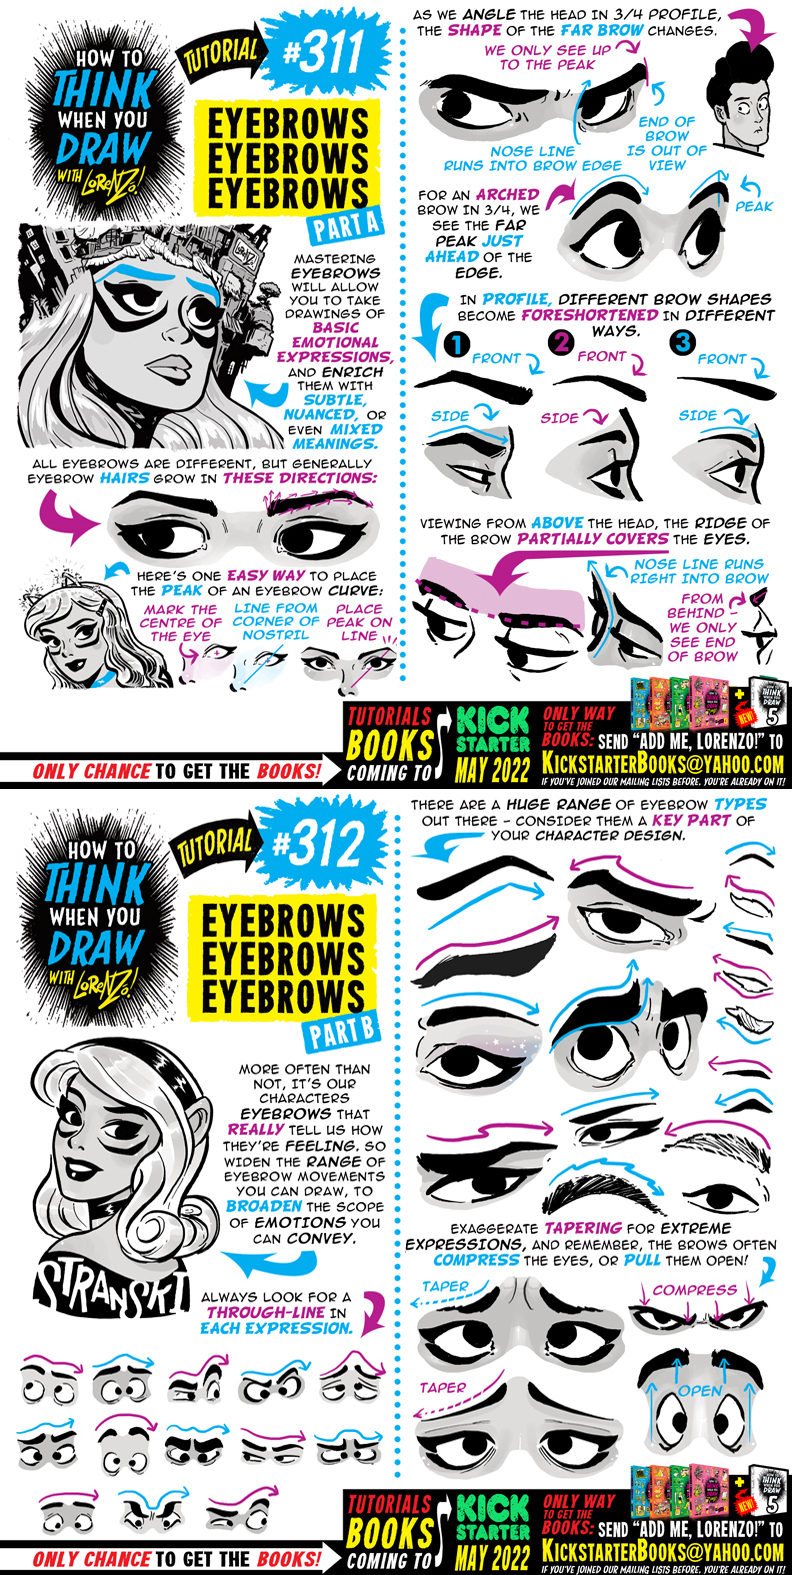 EtheringtonBrothers on X: Our feature tutorial/artist for today